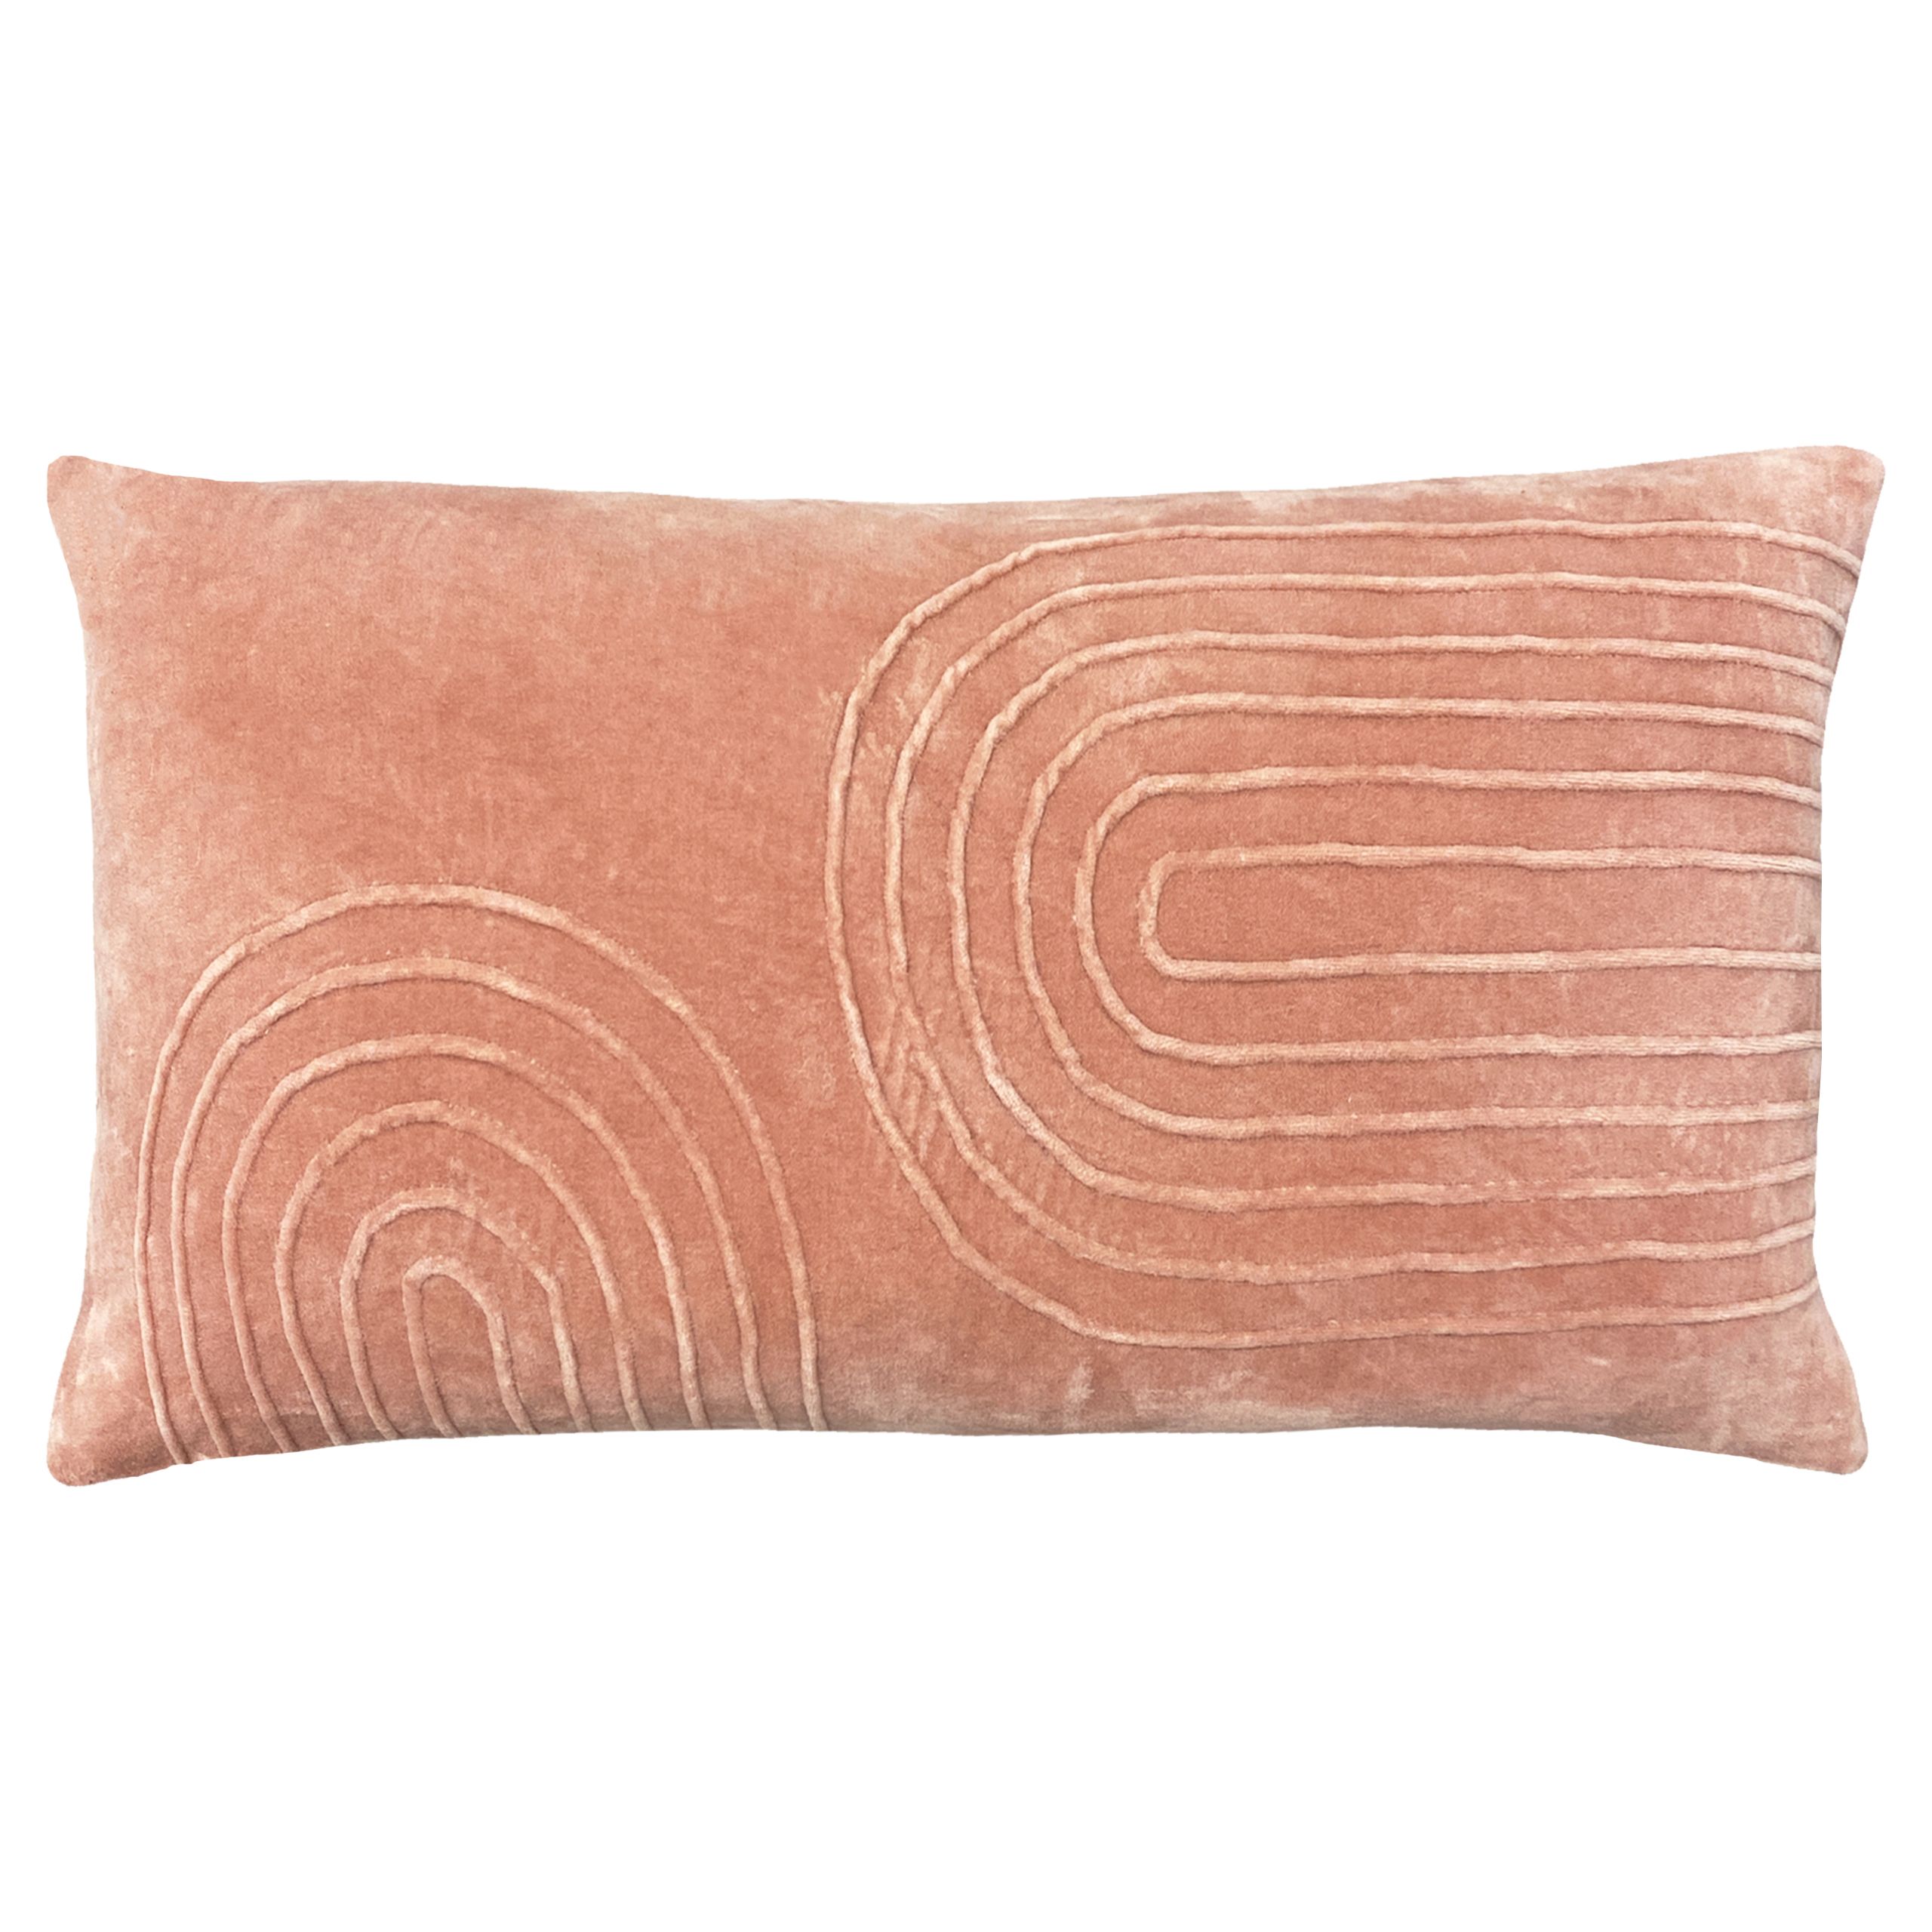 Features a linear pleated design in soft, cotton velvet which is available in a variety of beautiful colours. Complete with standard knife edging and hidden zip closure. Made of 100% Cotton, making this cushion super comfy and durable.